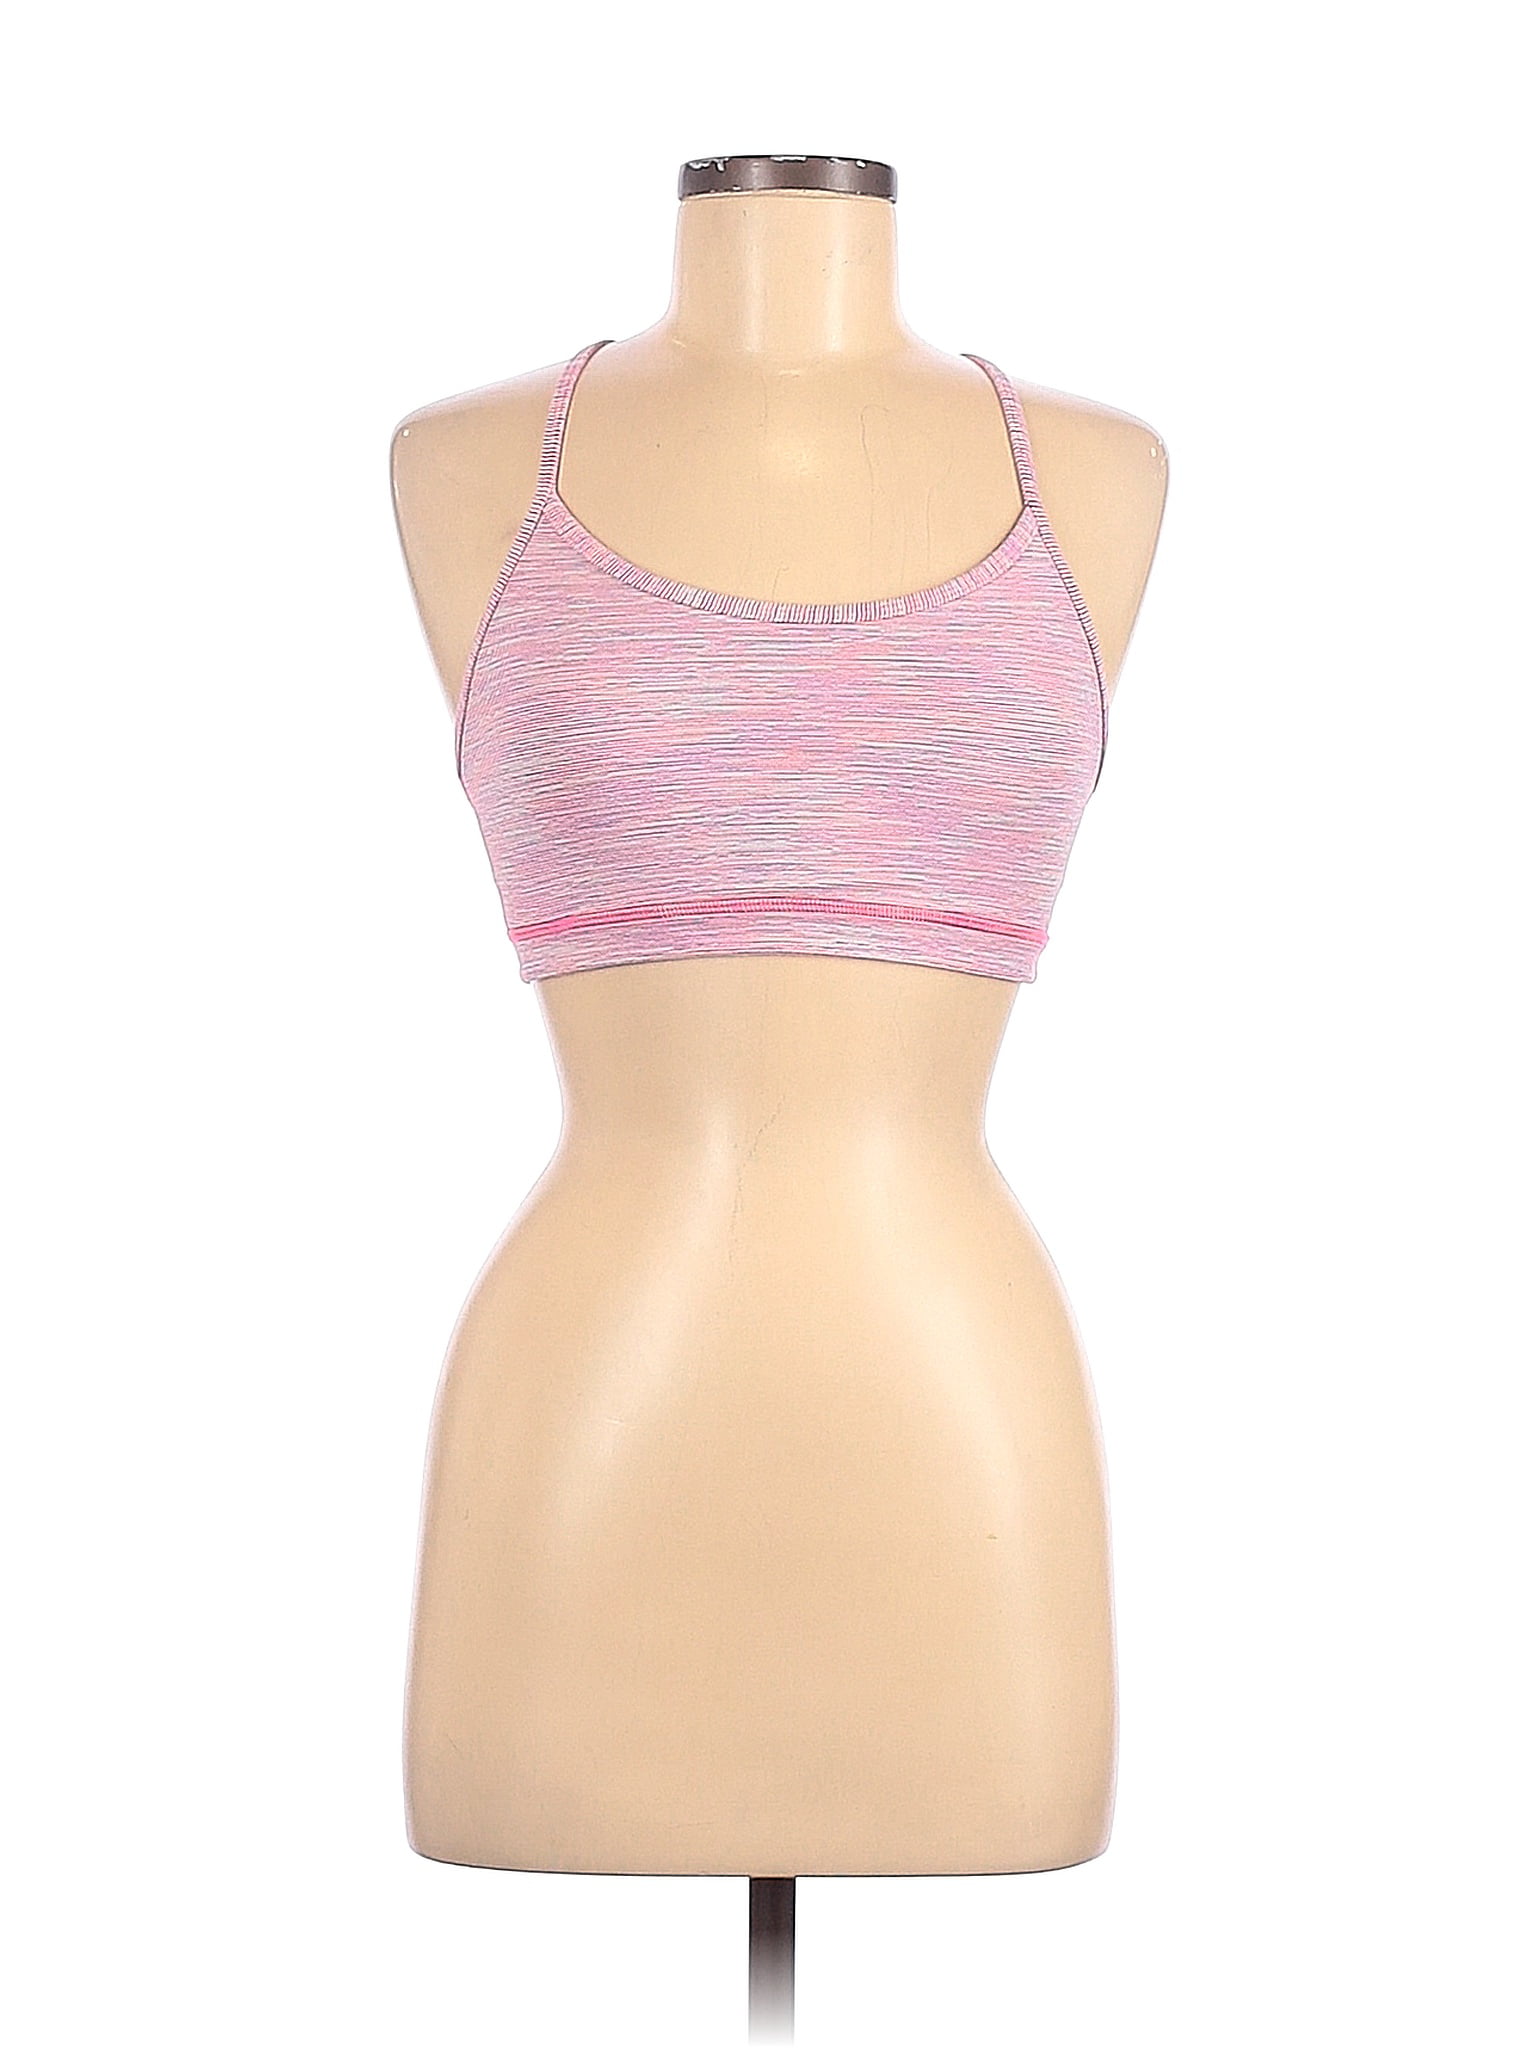 Pre-Owned Lululemon Athletica Womens Size 6 Sports Nepal